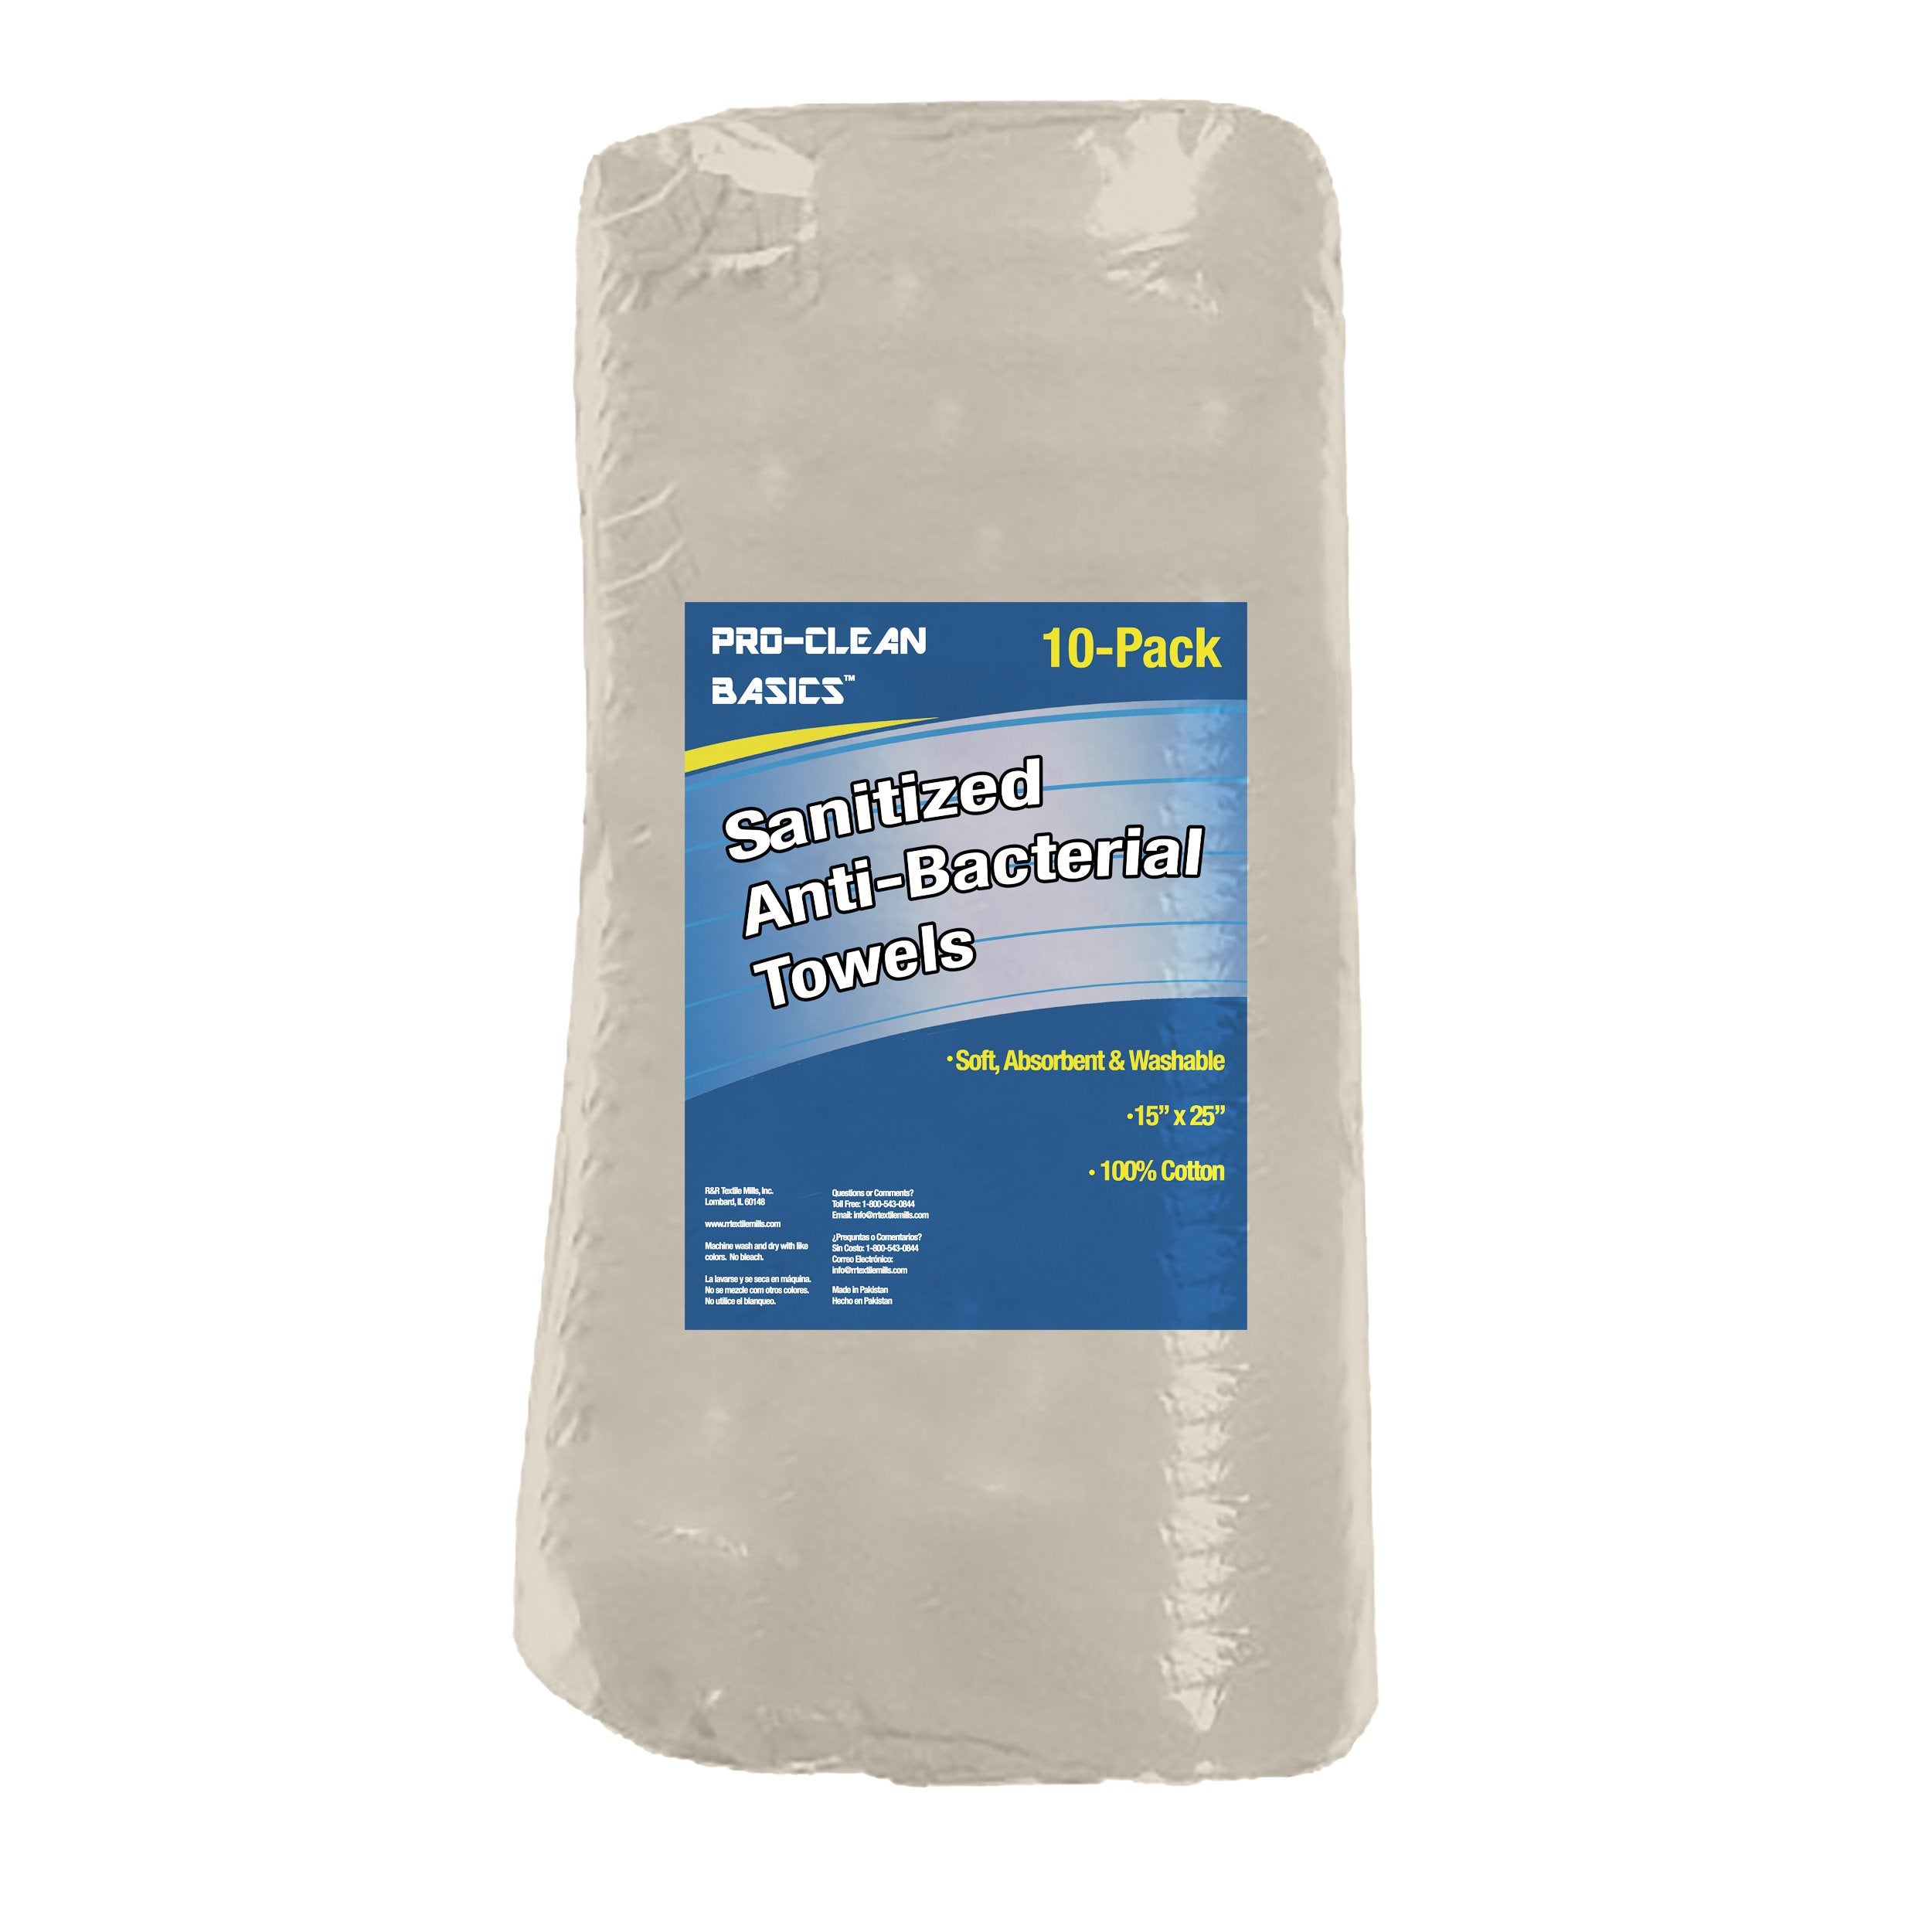 Pro-Clean Basics: Sanitized Anti-Bacterial Beige Wiping Towel, 15in x 25in